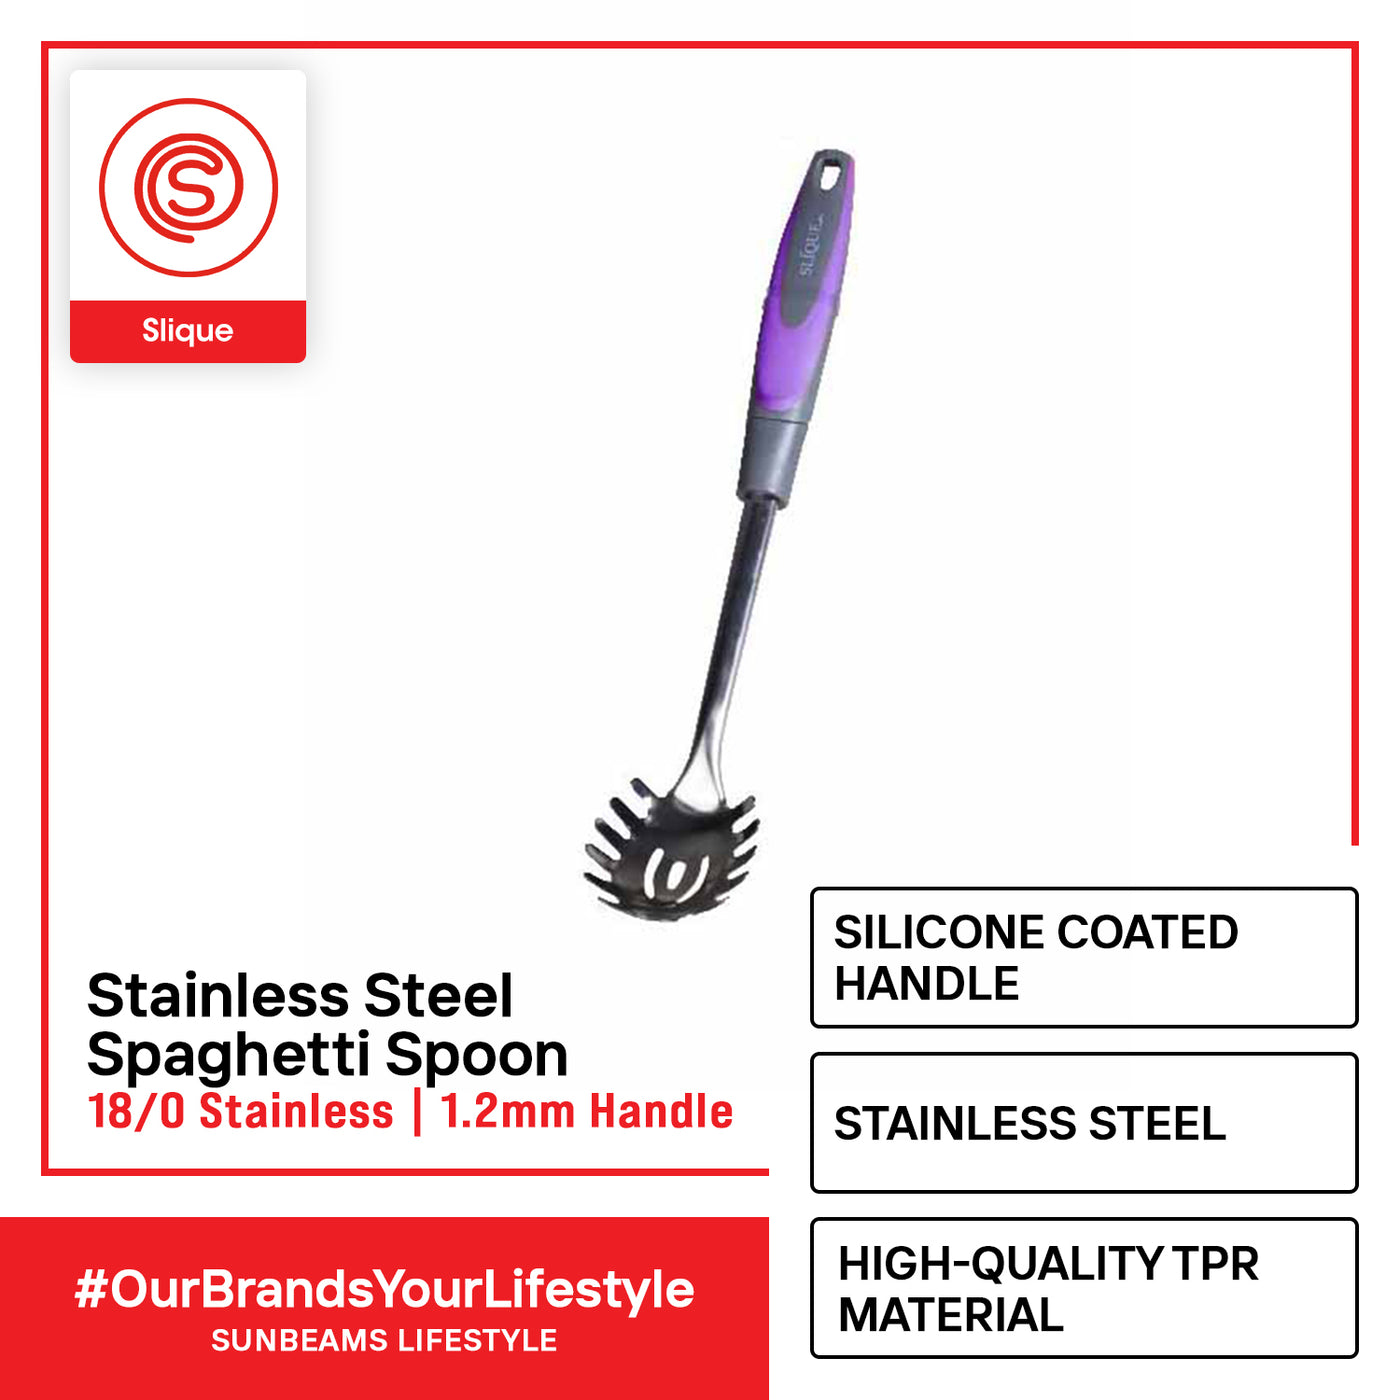 SLIQUE Premium 18/8 Stainless Steel Spaghetti Spoon TPR Silicone Handle Kitchen Essentials Amazing Gift Idea For Any Occasion! (Purple)